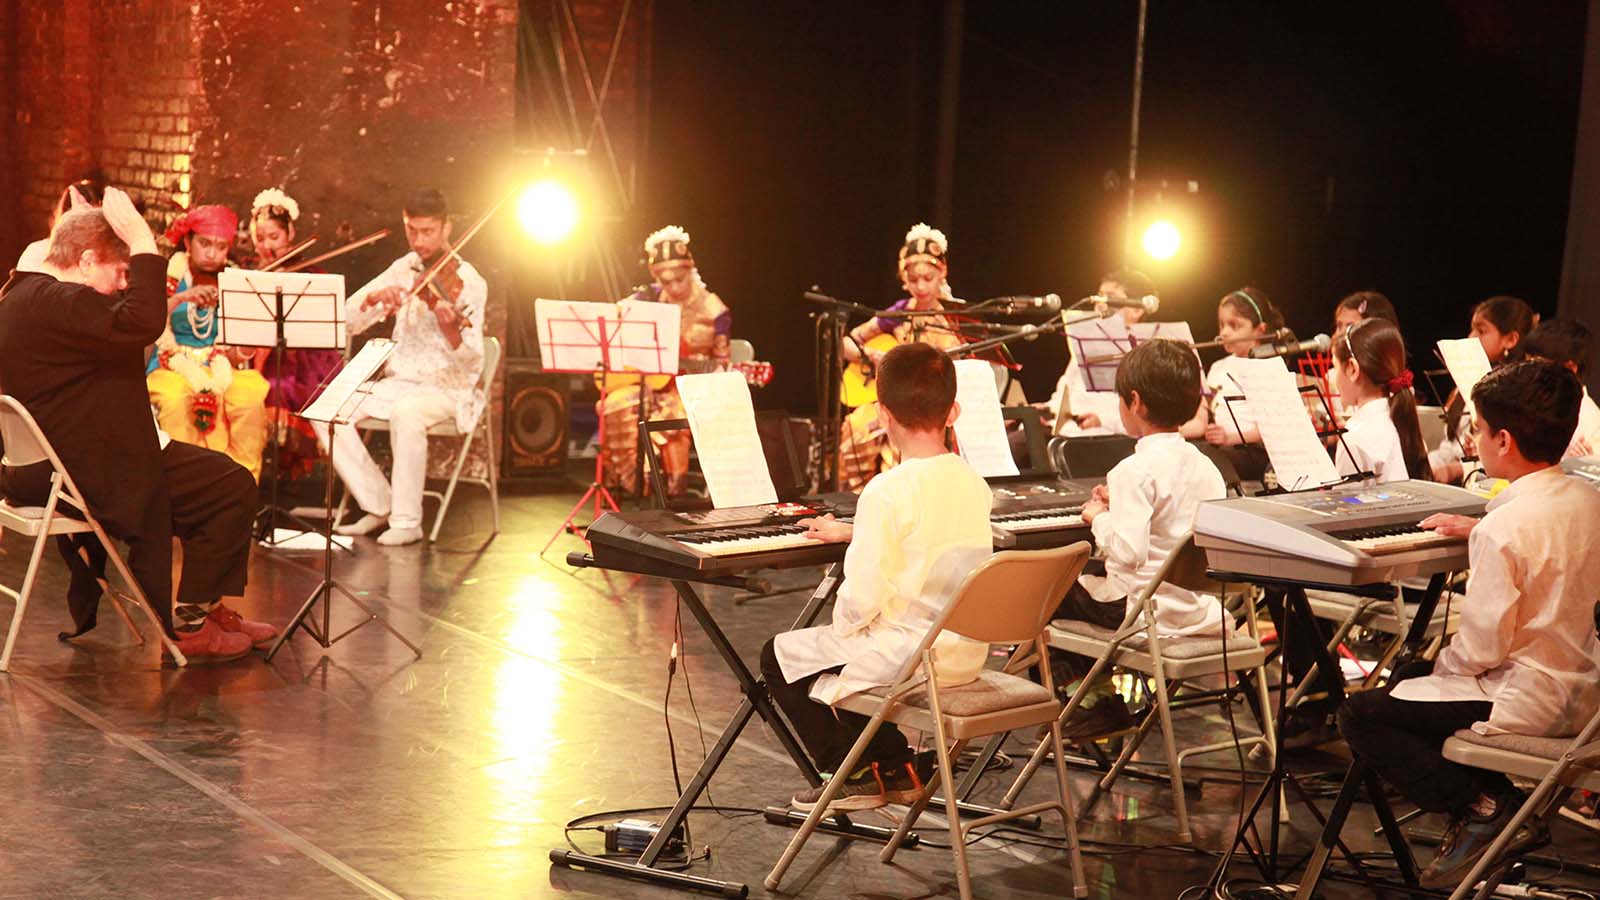 On a stage, a band of young musicians play together on keyboards and violins, wearing traditional Indian dress